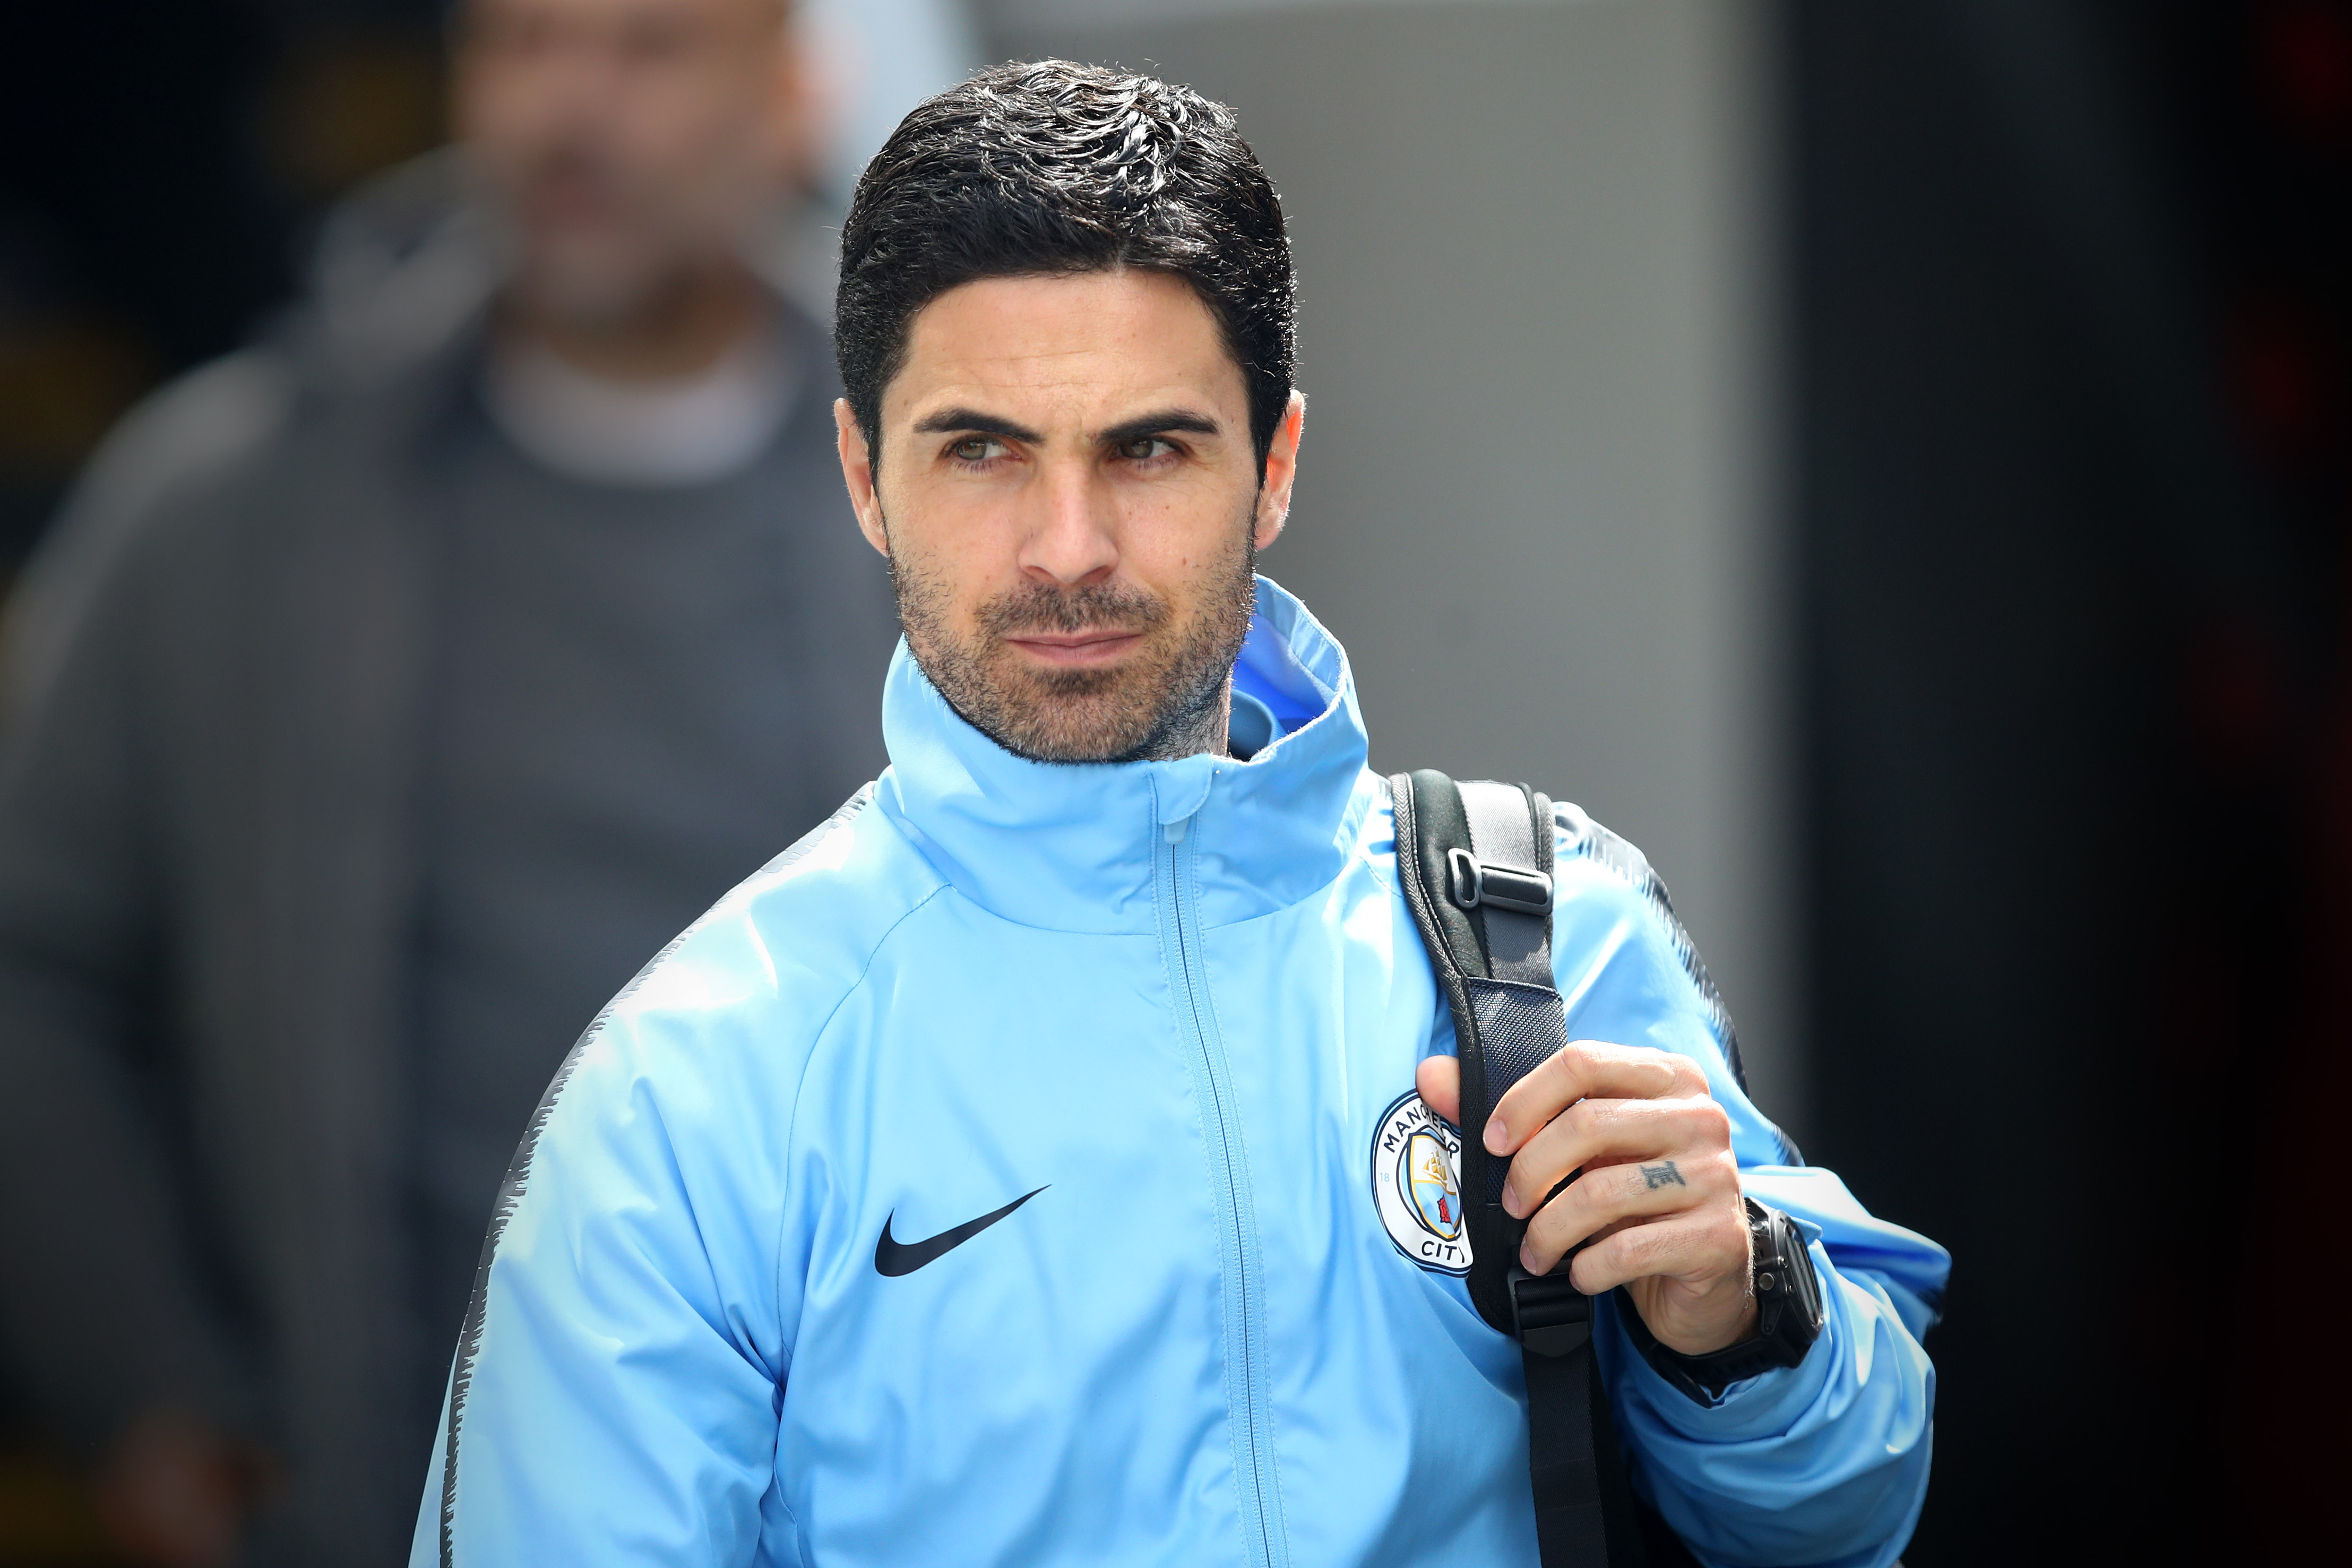 LONDON, ENGLAND - APRIL 14:  Mikel Arteta assistant manager of Manchester City arrives prior to the Premier League match between Crystal Palace and Manchester City at Selhurst Park on April 14, 2019 in London, United Kingdom. (Photo by Julian Finney/Getty Images)